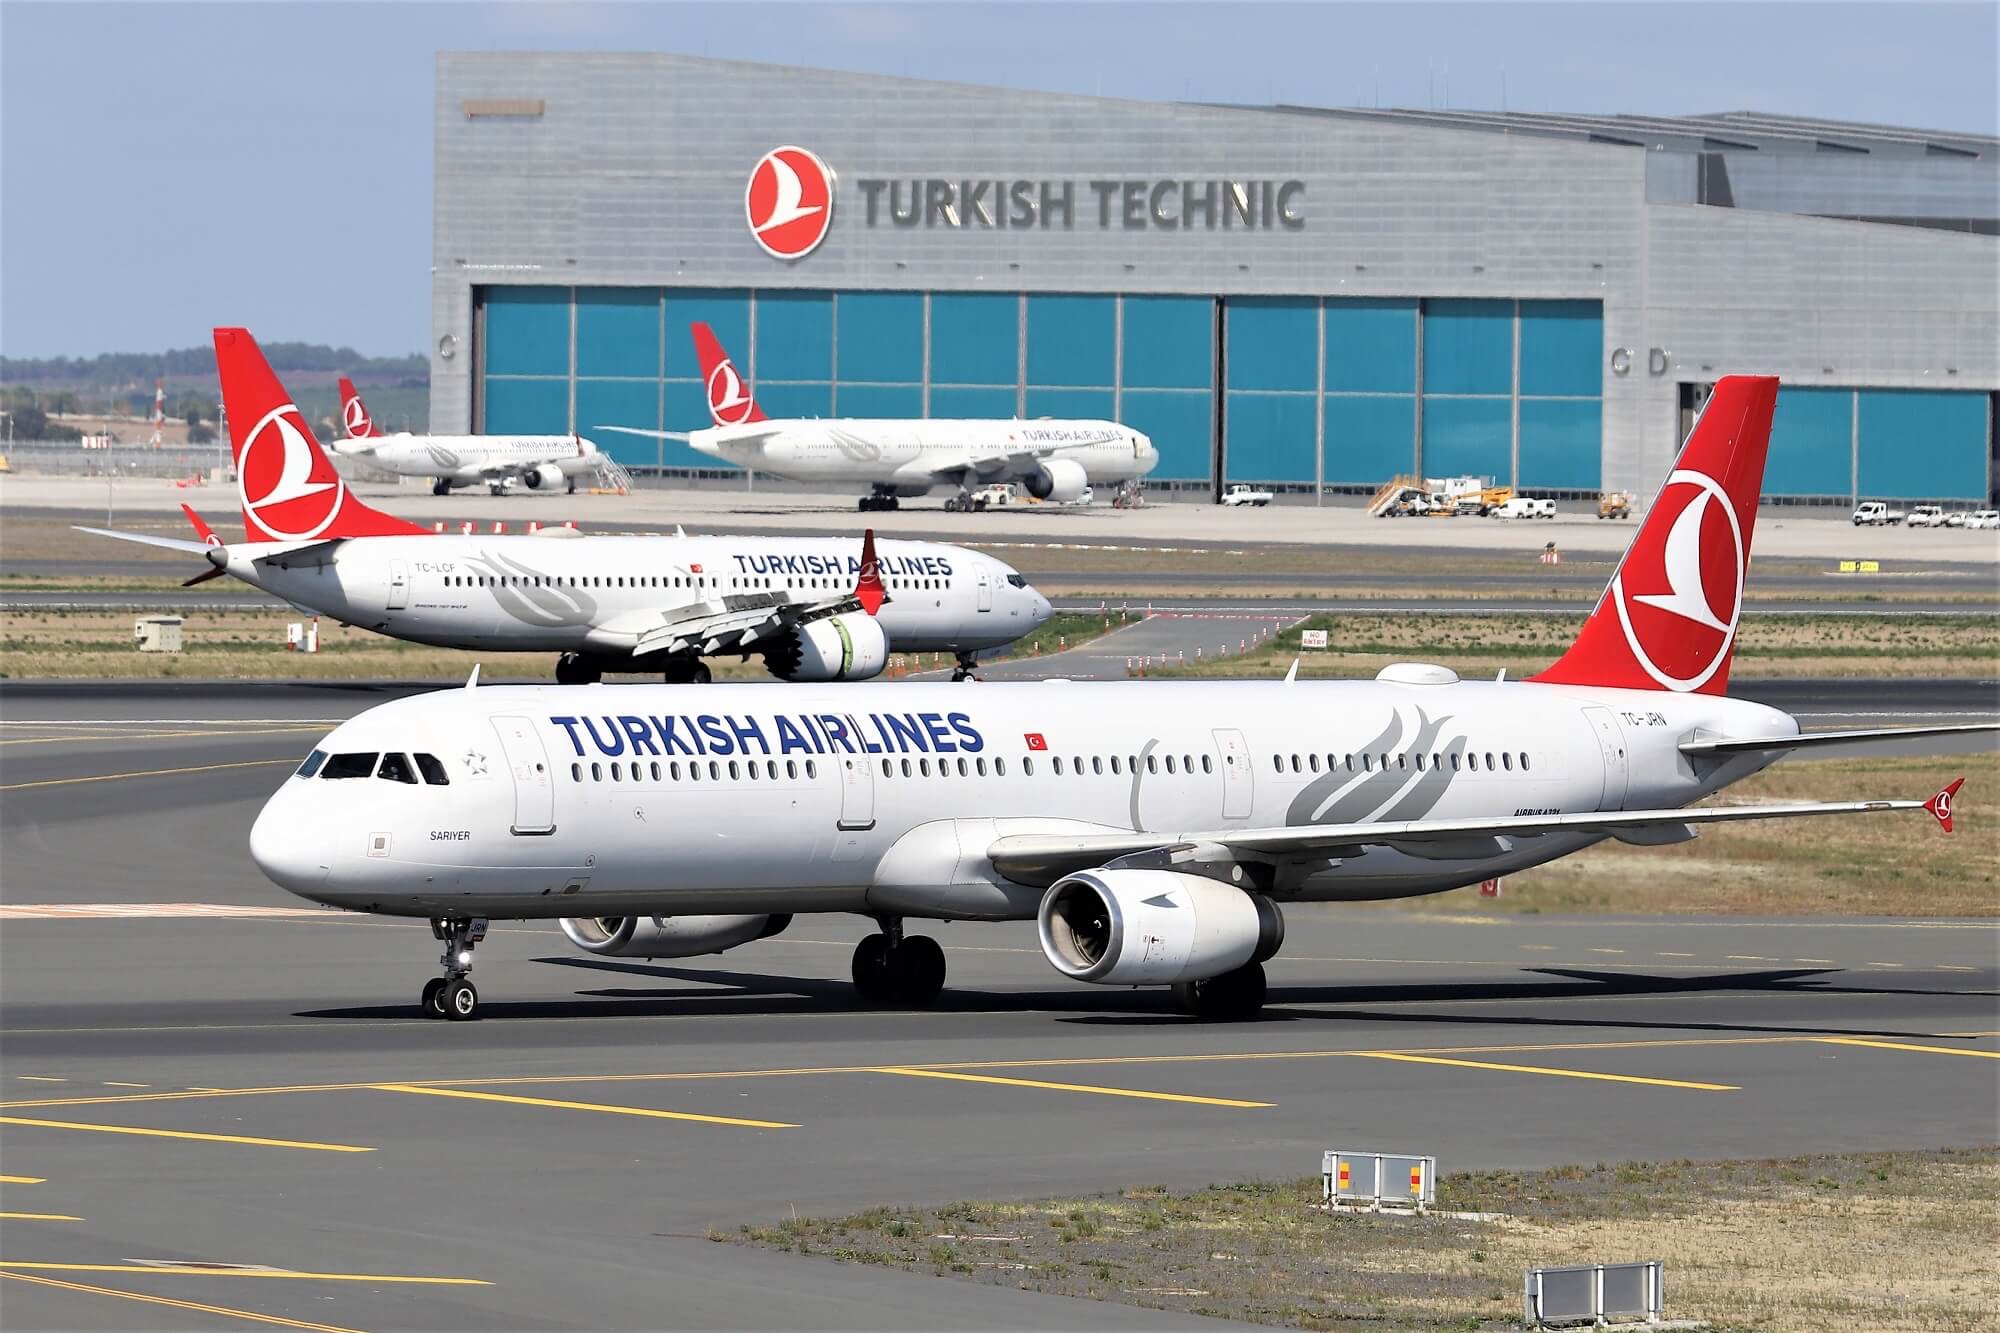 Turkish airlines airplanes at an airport